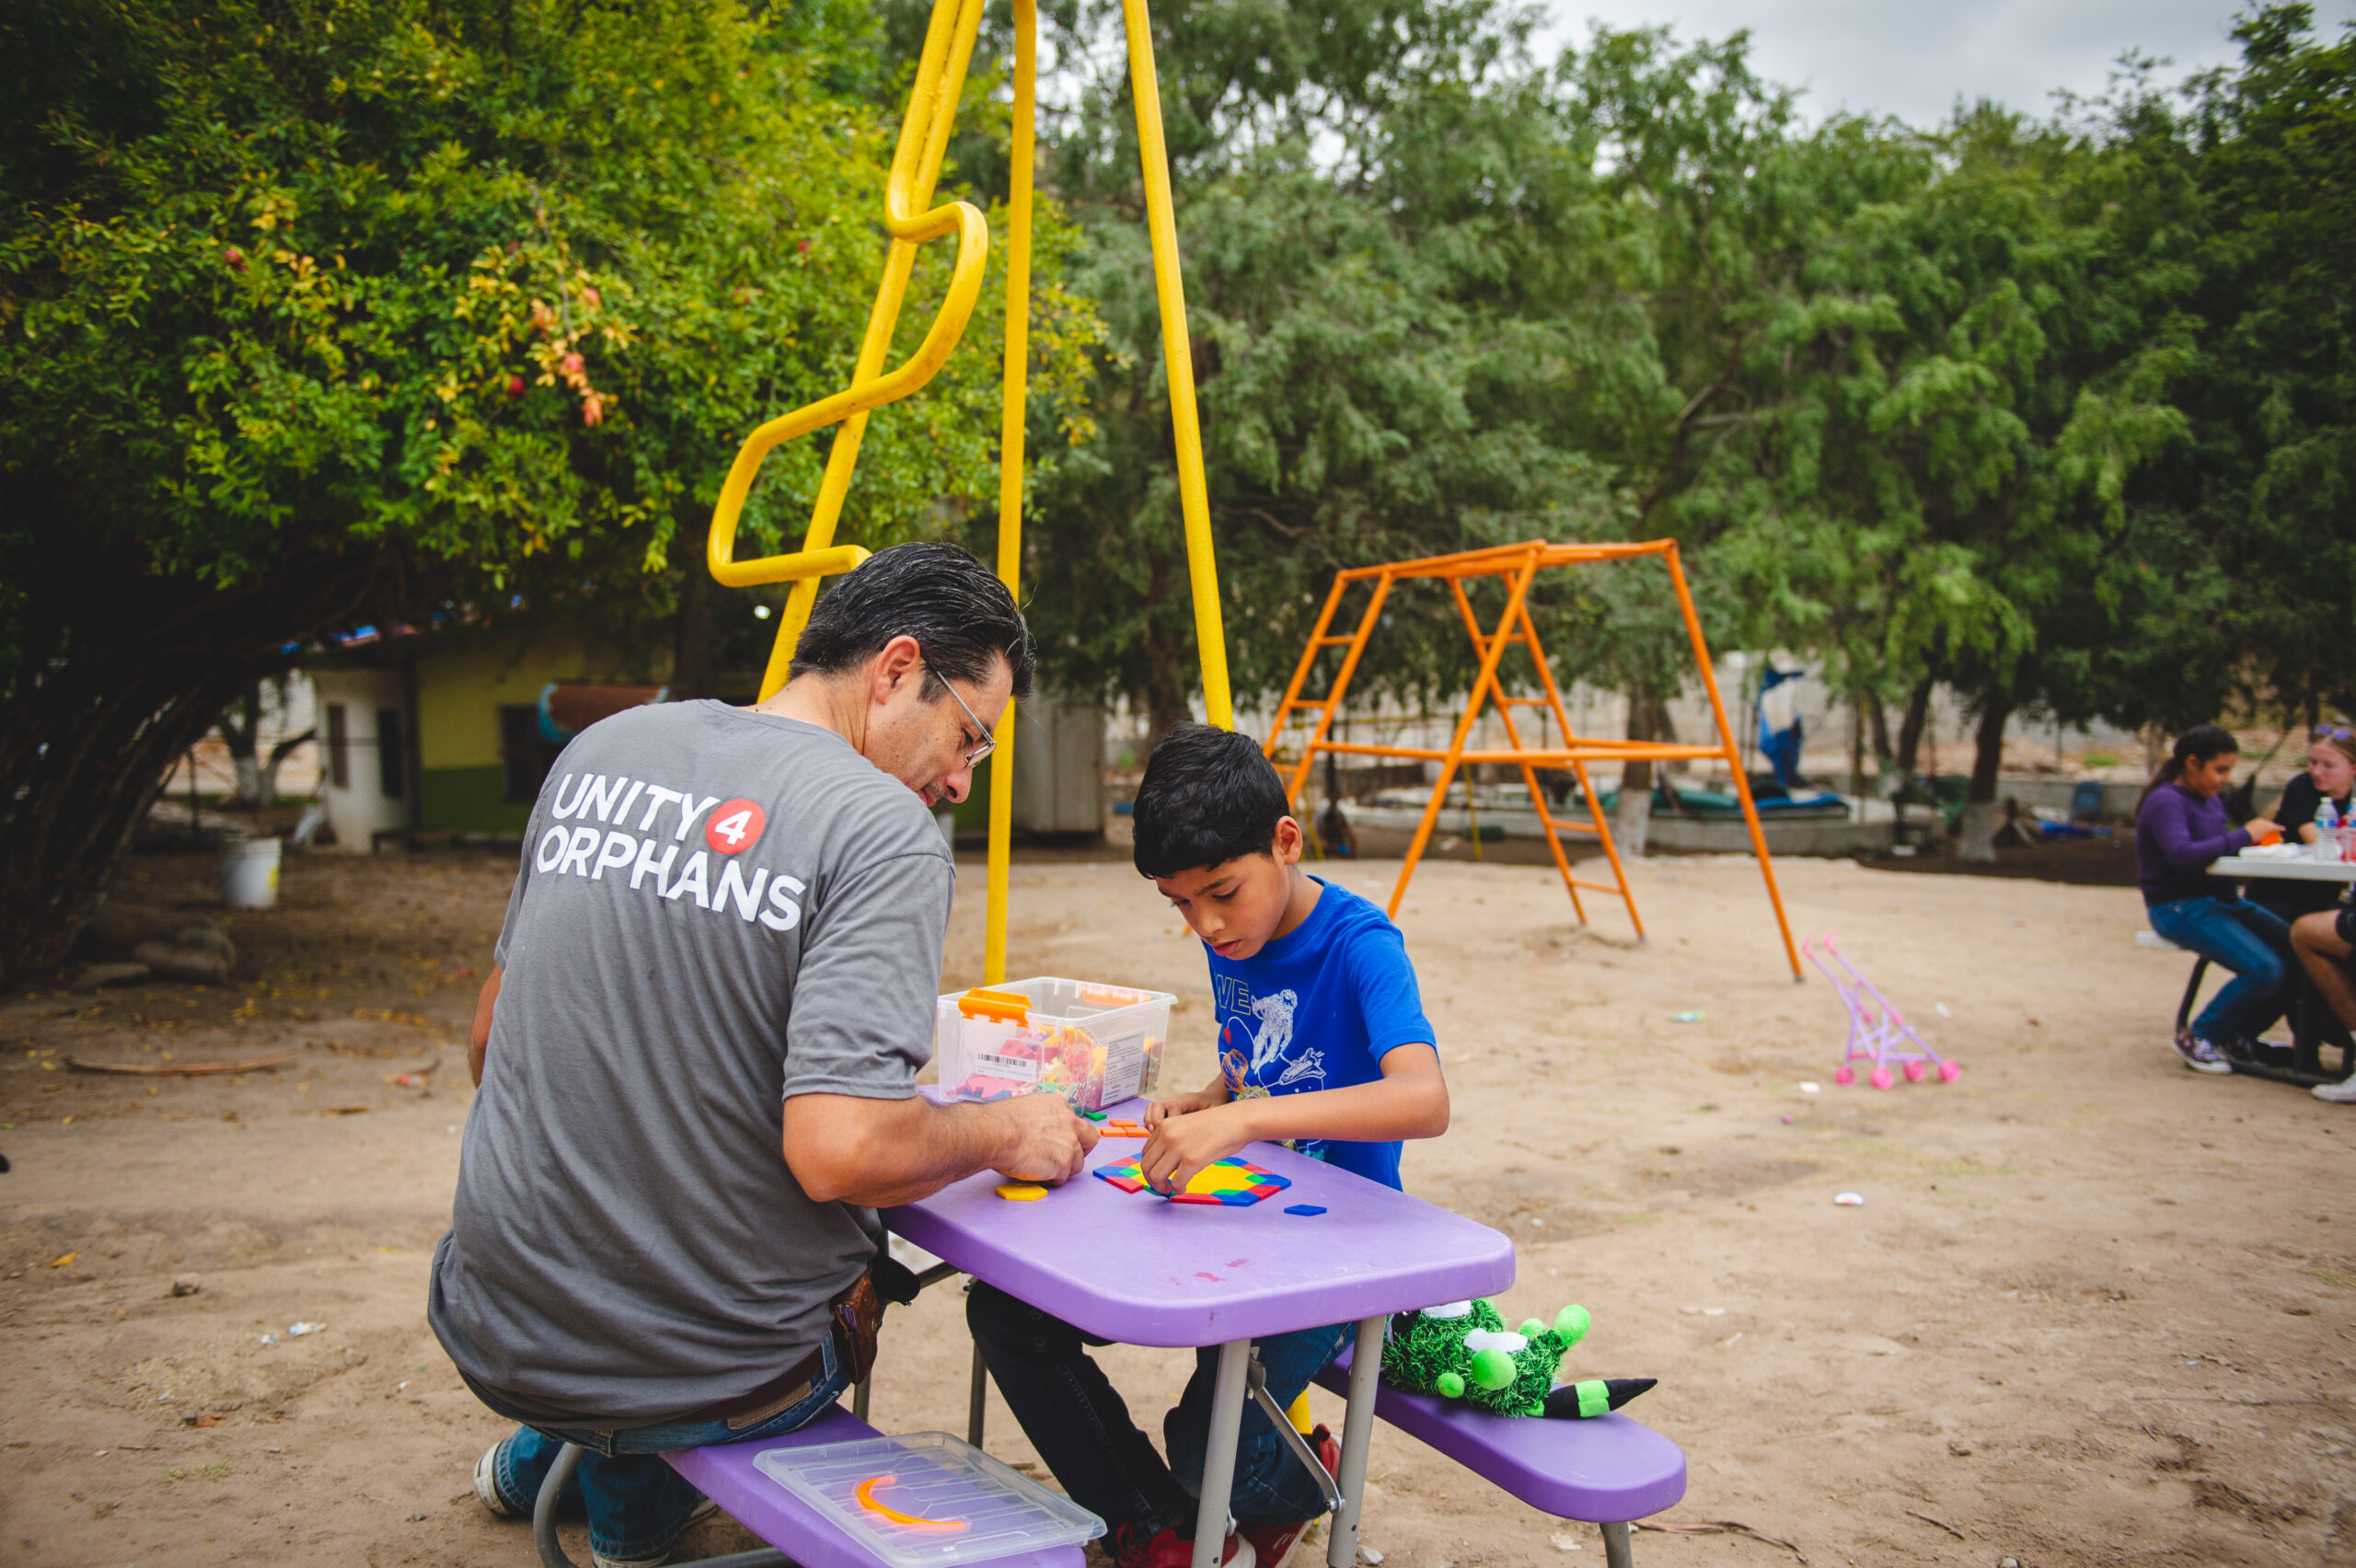 Unity 4 Orphans volunteer playing with a child at an orphanage in Mexico